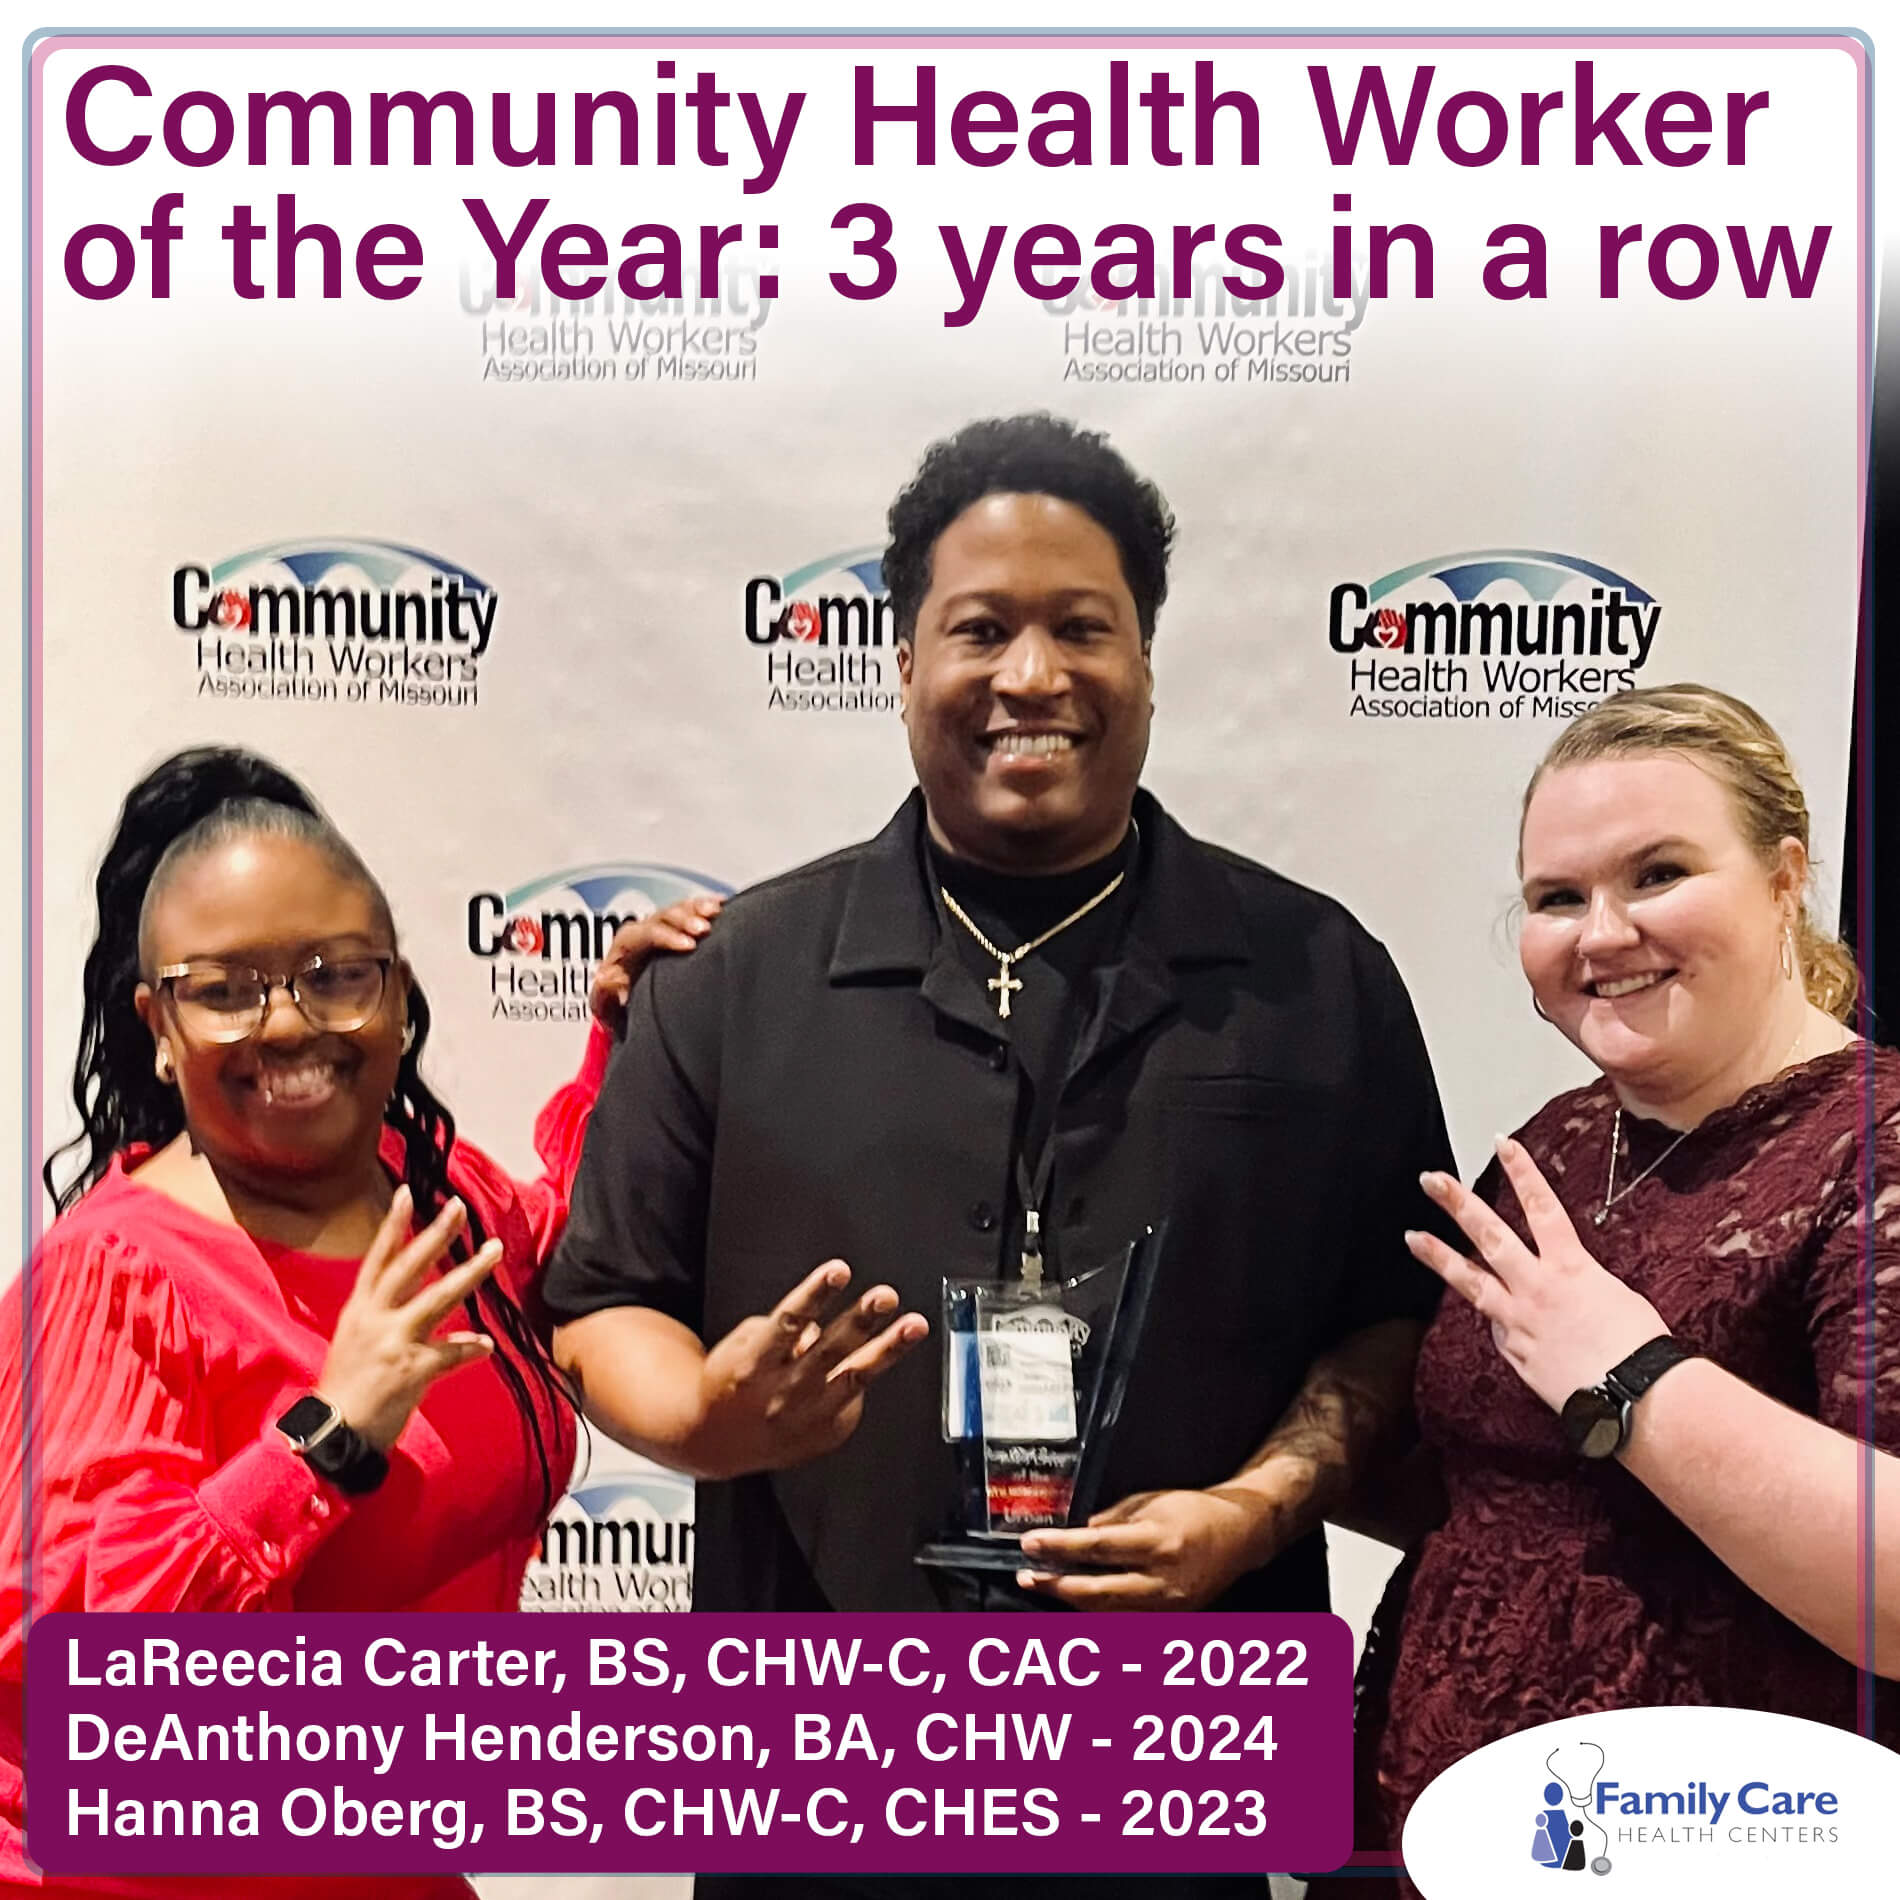 Family Care Health Centers Community Health Workers of the Year 2022, 2023, 2024